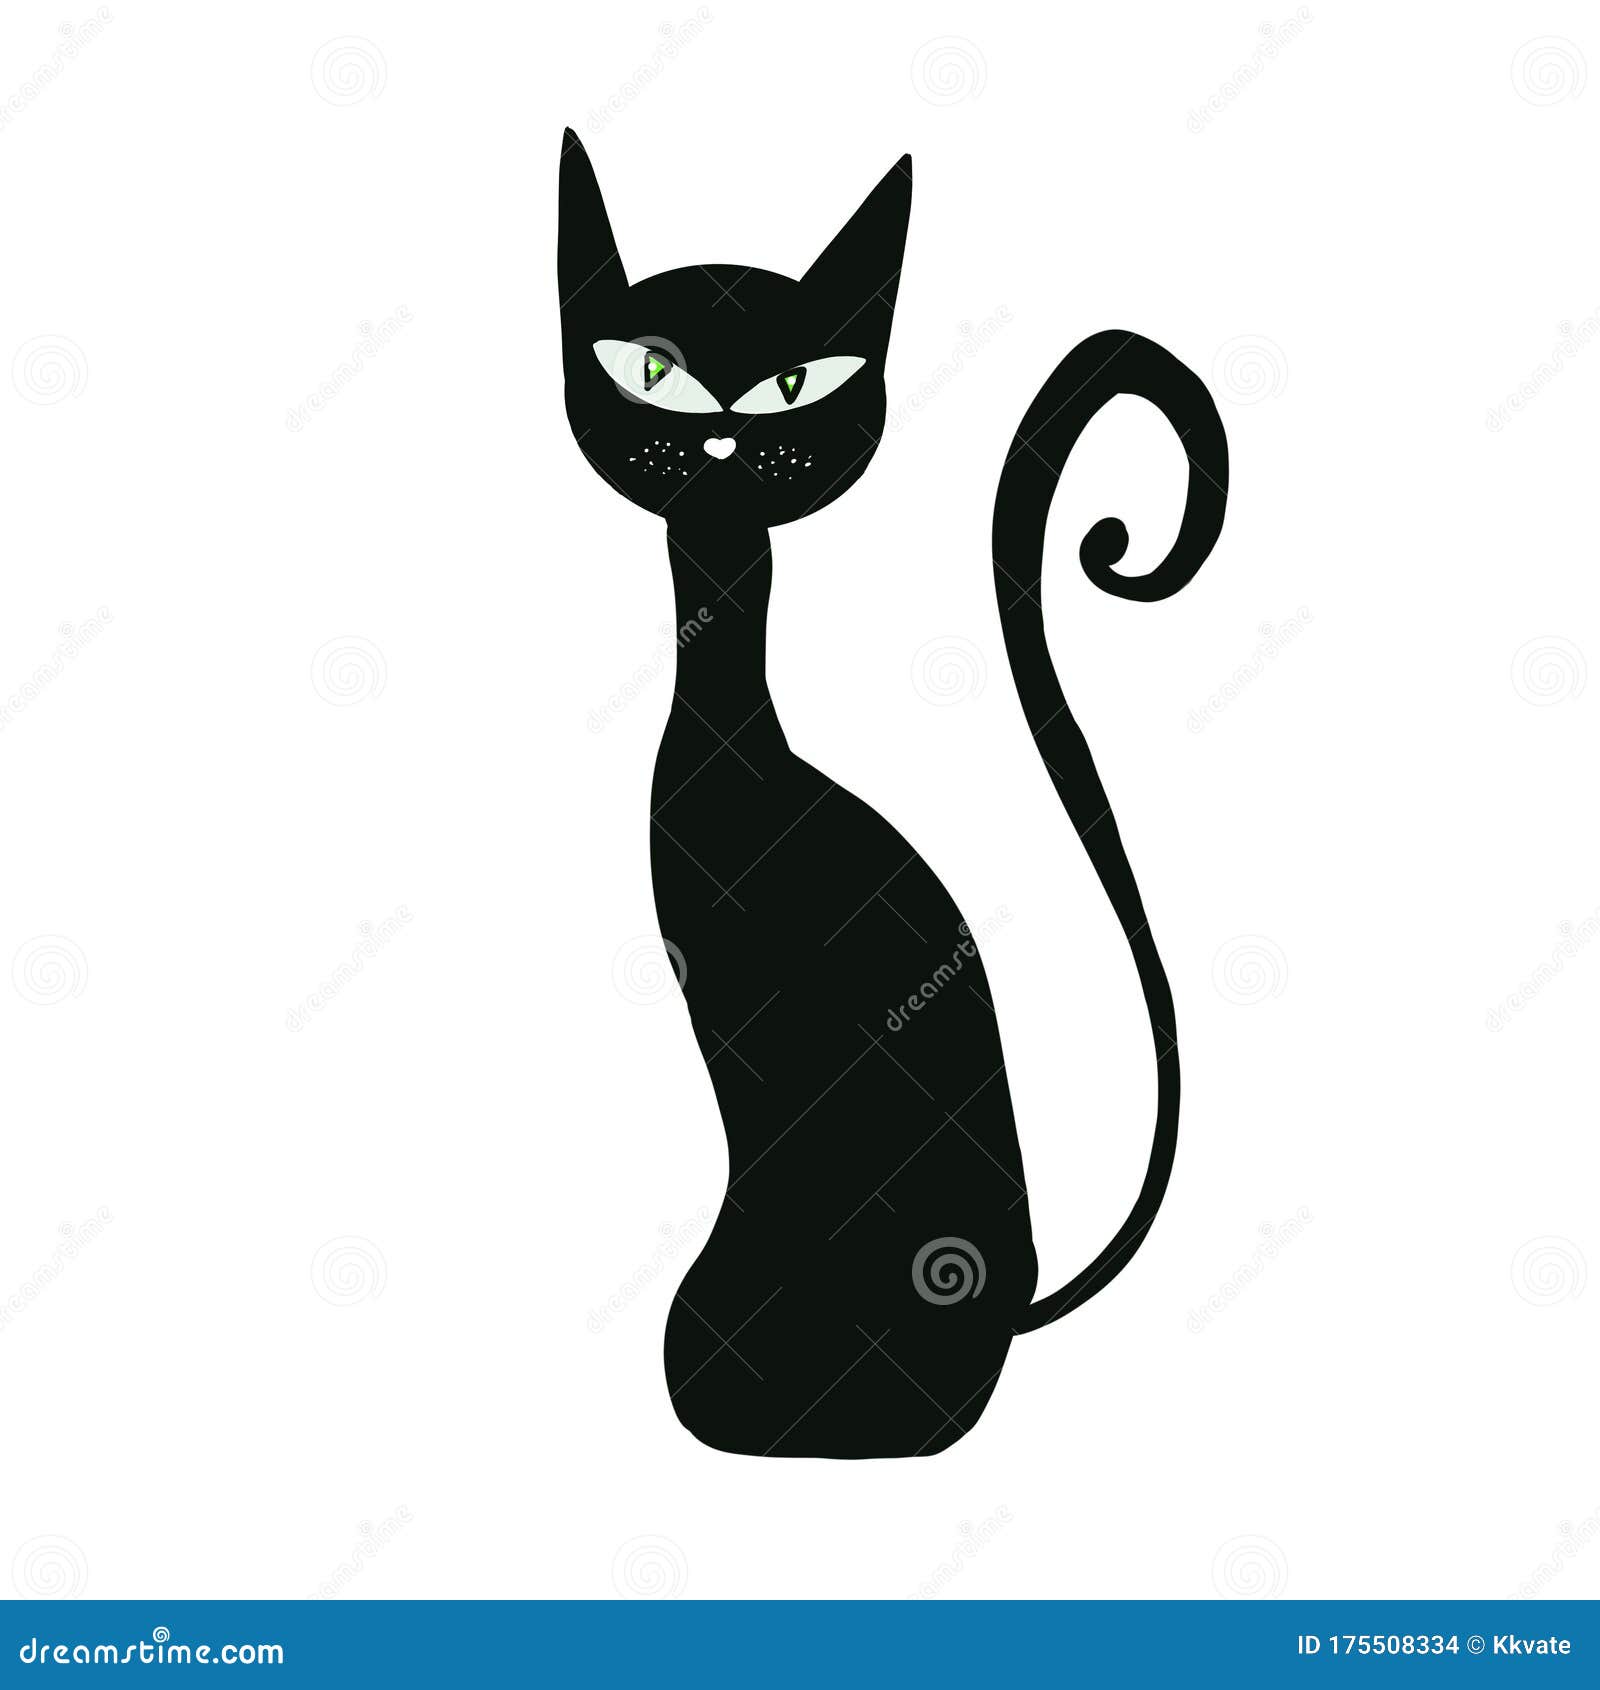 Black Cat Isolated on White Background. Cartoon Hand Drawing. Halloween  Design. Witchcraft Stock Illustration - Illustration of domestic, magic:  175508334